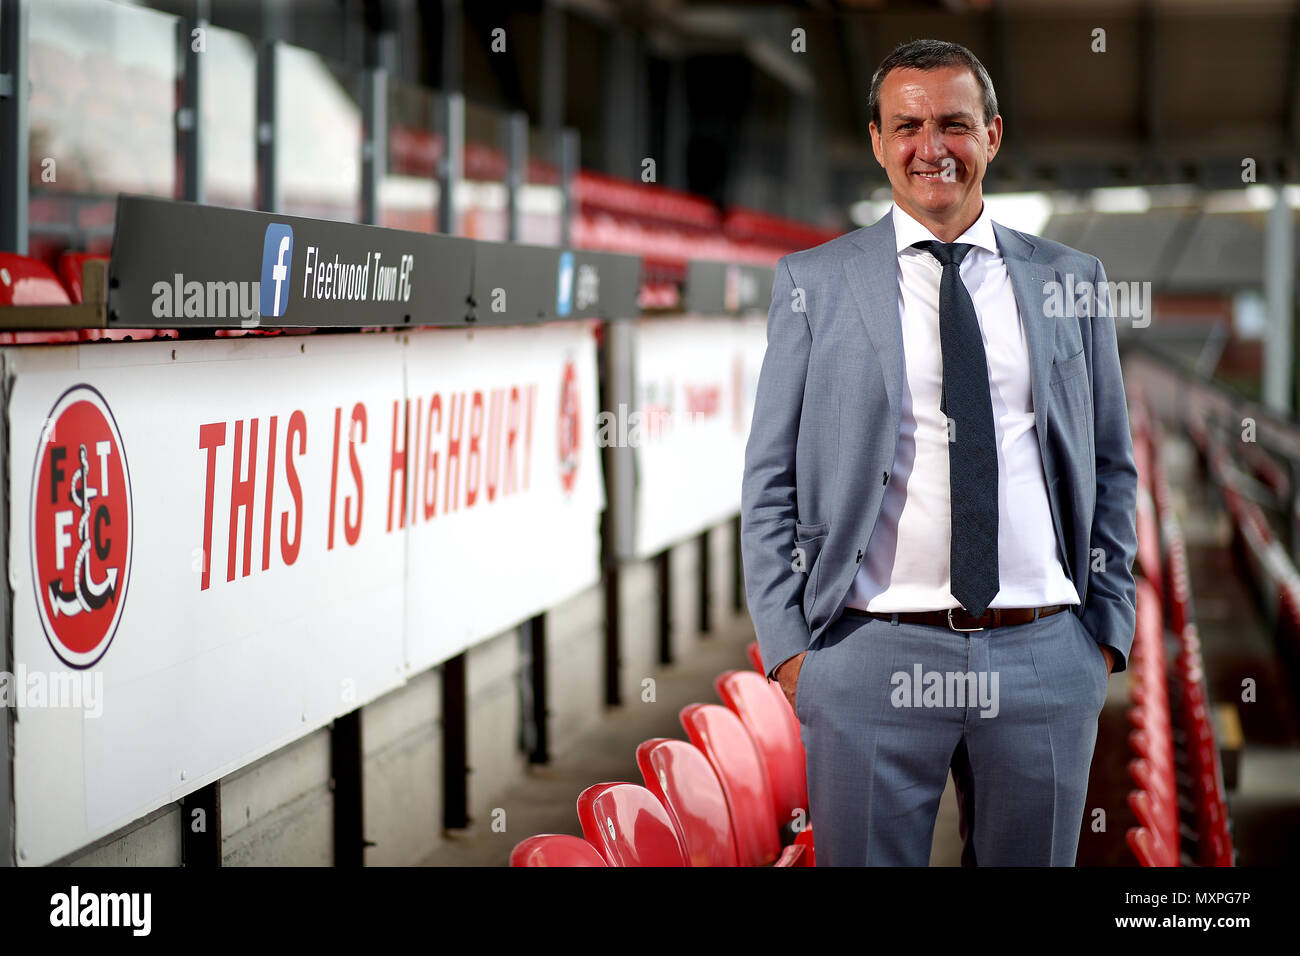 Fleetwood Town chairman Andy Pilley during the press conference at Highbury Stadium, Fleetwood. PRESS ASSOCIATION Photo. Picture date: Monday June 4, 2018. See PA story SOCCER Fleetwood. Photo credit should read: Nick Potts/PA Wire. RESTRICTIONS: No use with unauthorised audio, video, data, fixture lists, club/league logos or 'live' services. Online in-match use limited to 75 images, no video emulation. No use in betting, games or single club/league/player publications. Stock Photo